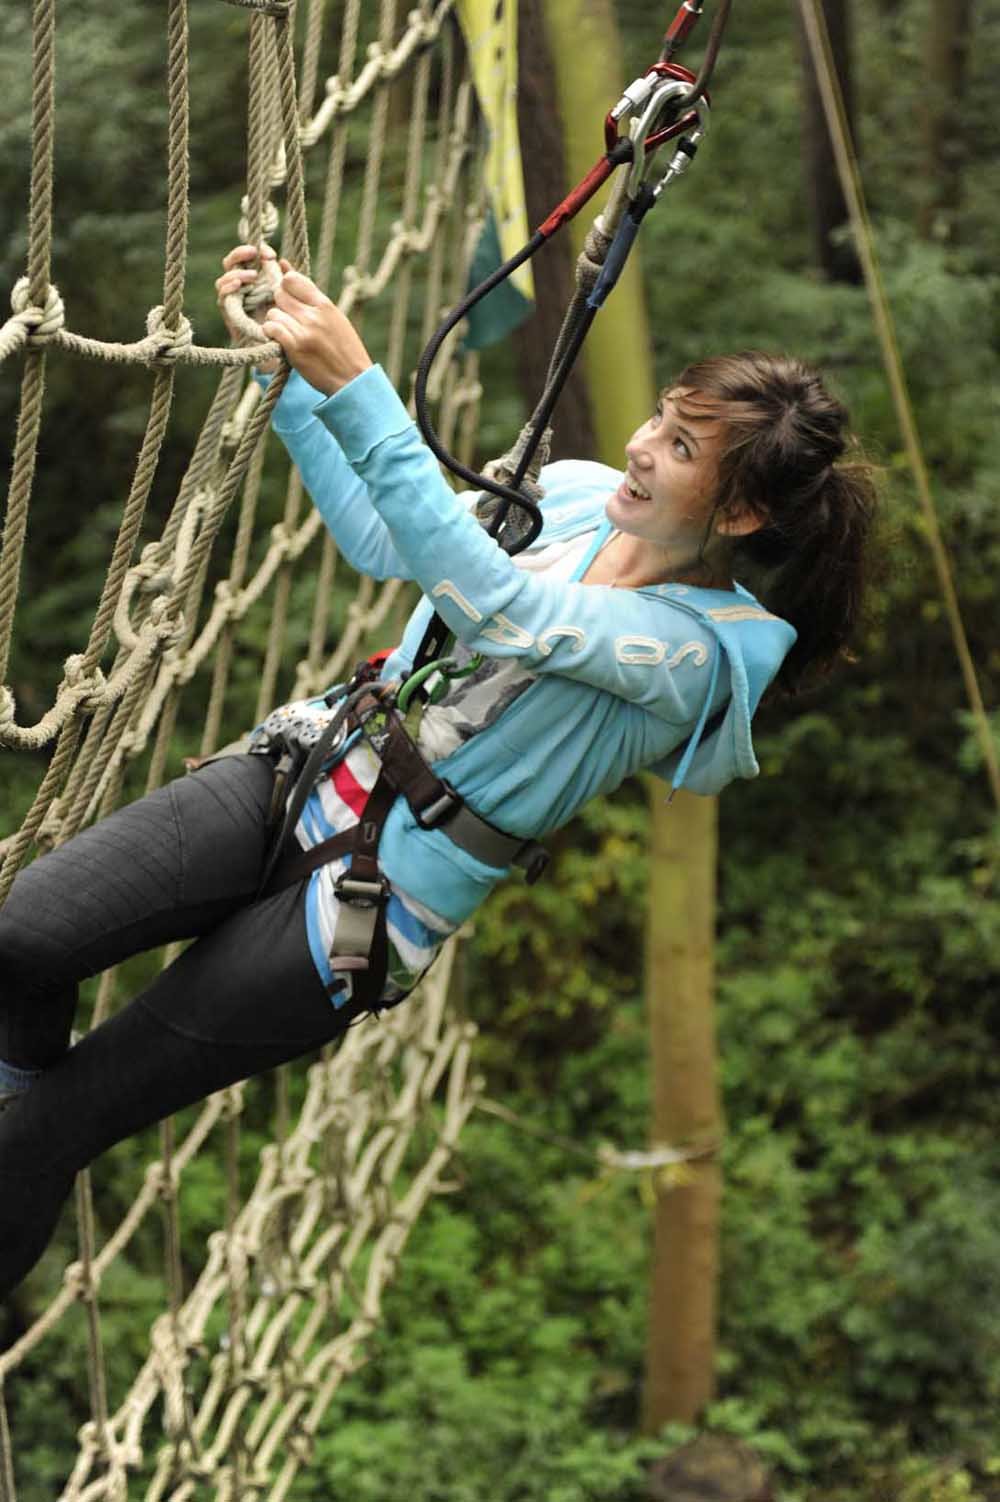 A teen girl on the cargo net in the ziplining course